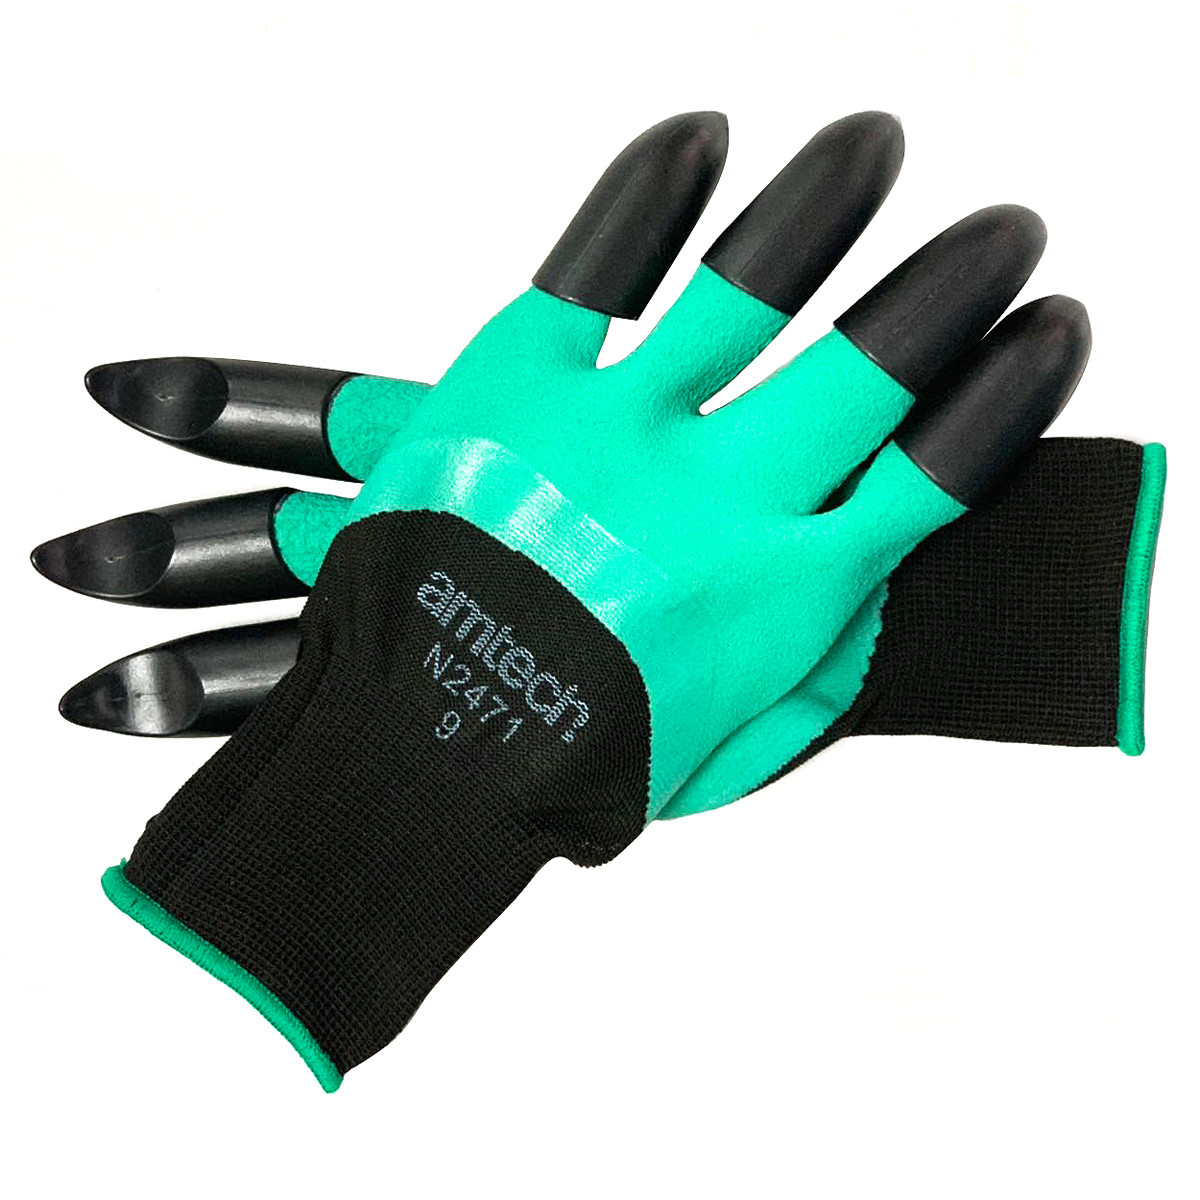 Am tech Garden Gloves with Claws (N2471)